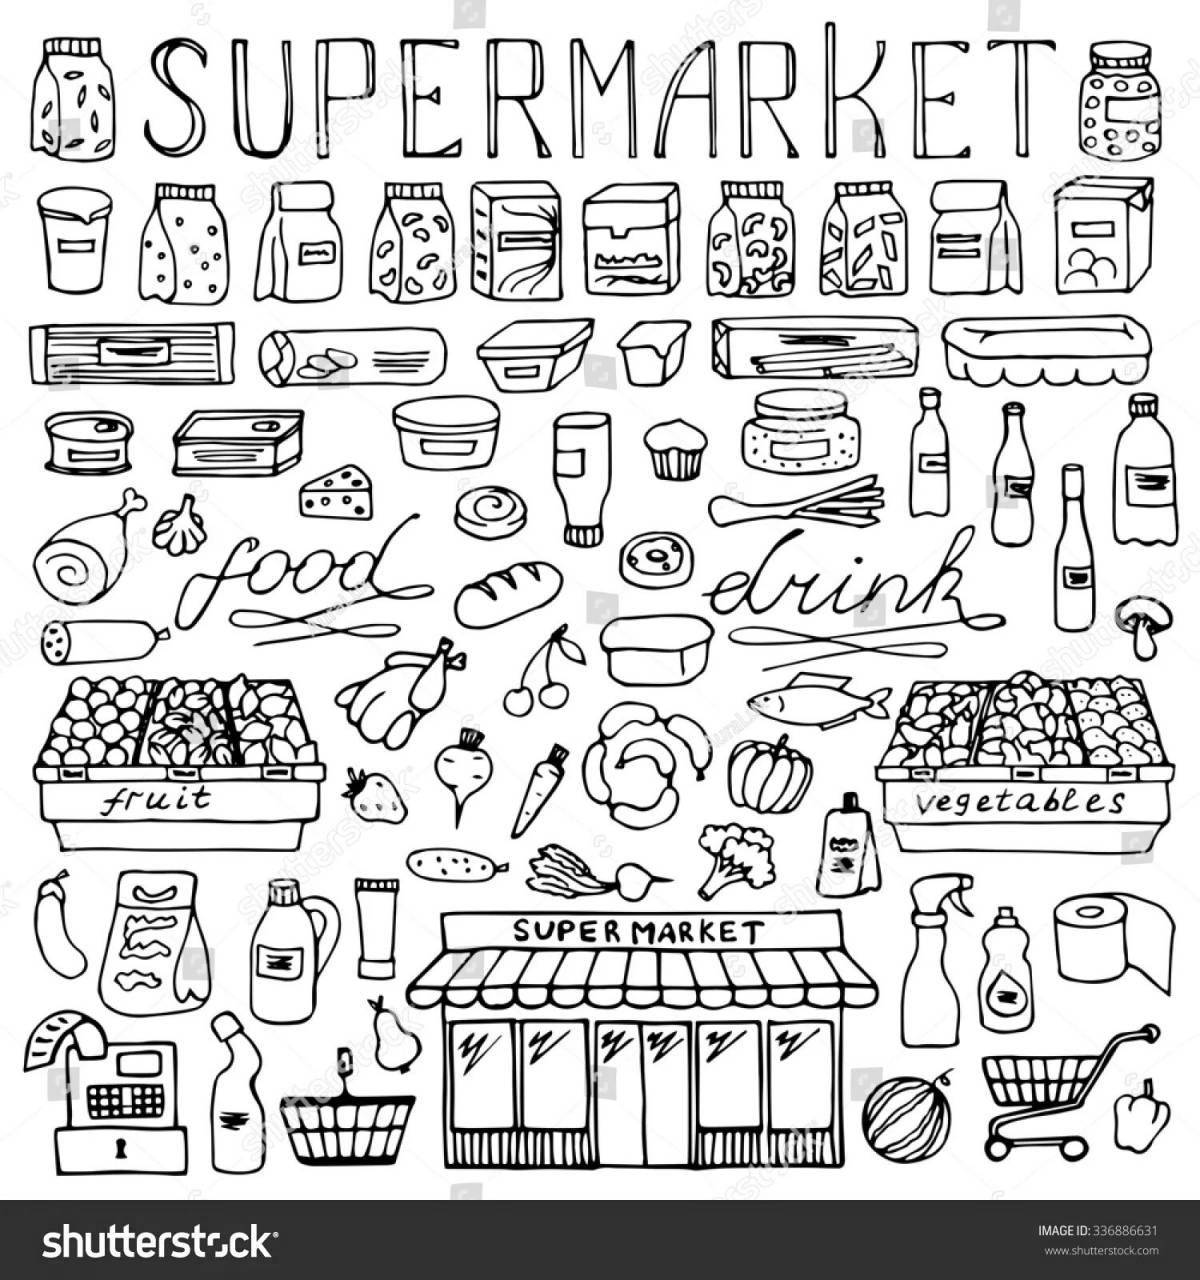 Incentive grocery store coloring page